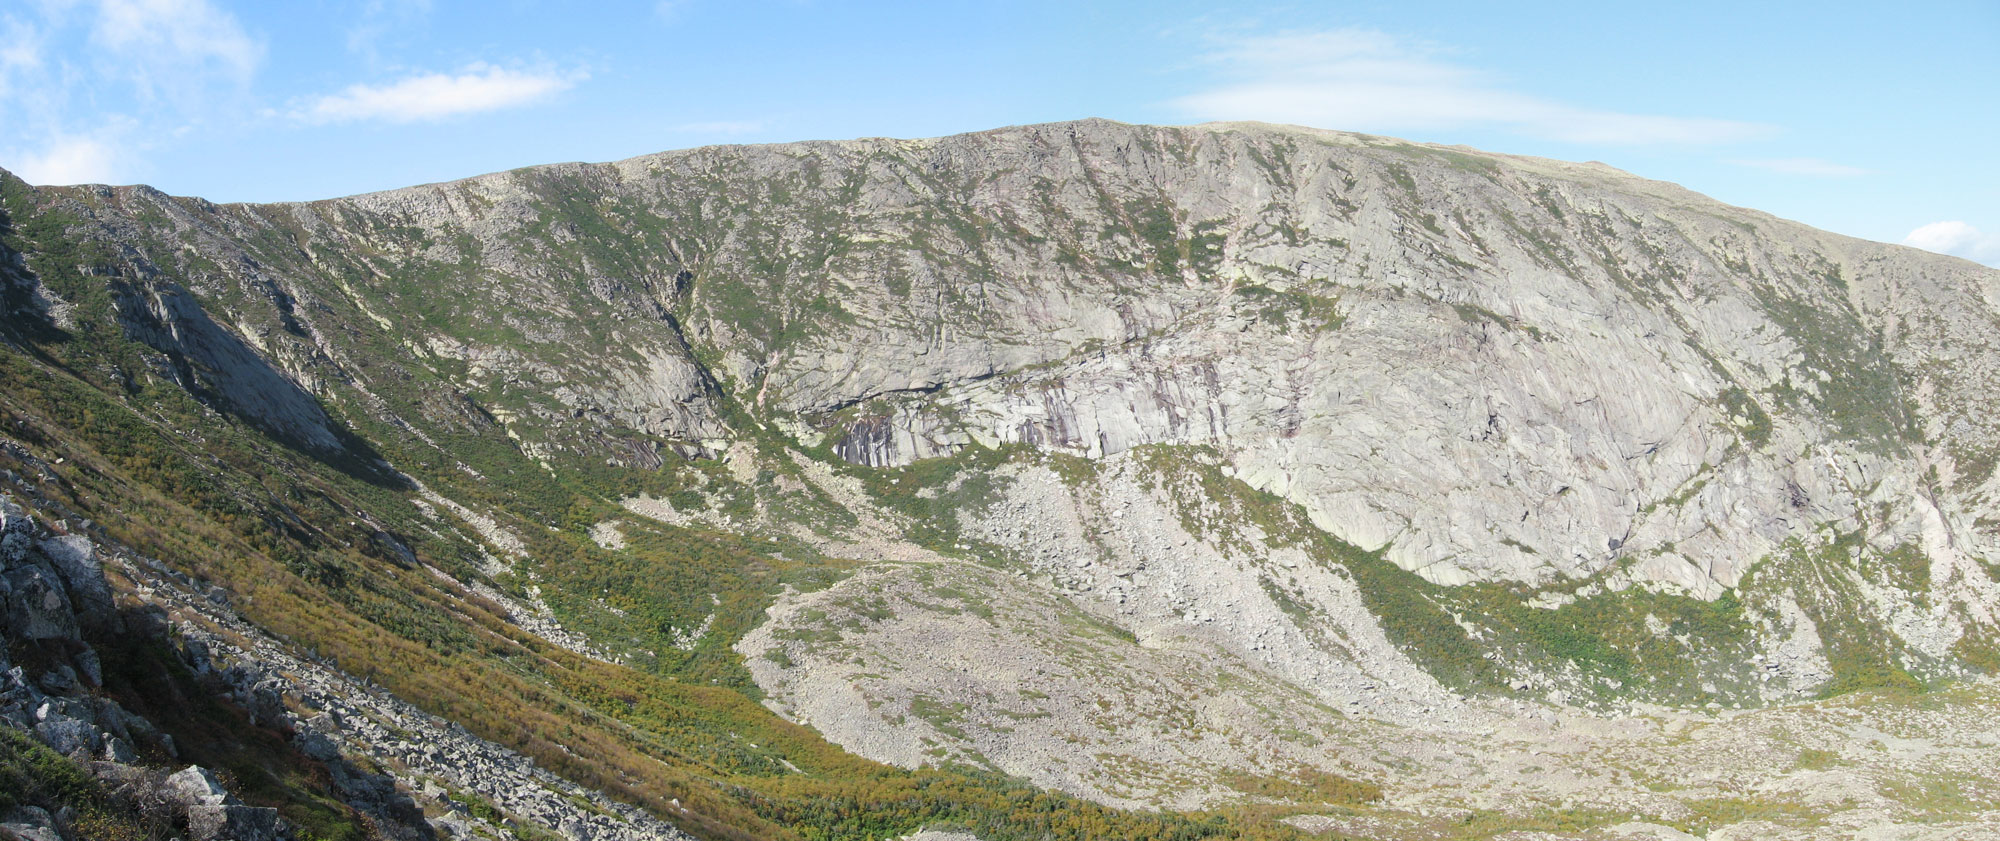 Photograph of the North Basin on Mount Katahdin, Maine. The photo shows a ridge that runs roughly horizontally across the image. The ridge slopes downward to the lower right foreground, where the floor of a basin is visible. The slopes of the ridge are partially vegetated, with unvegetated areas of light gray rock. 